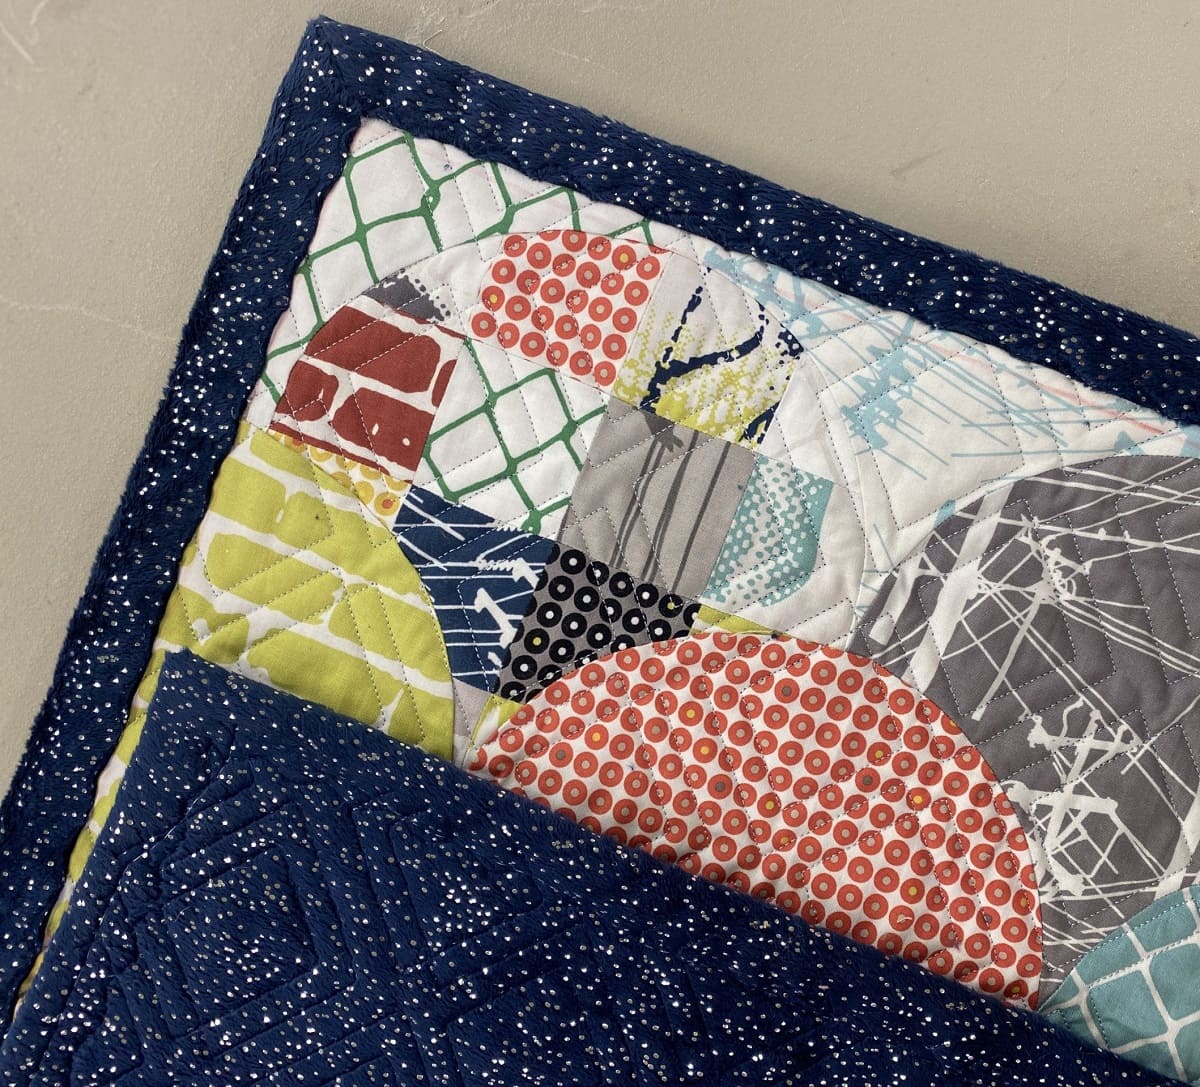 How To Self-Bind A Quilt With Minky Backing